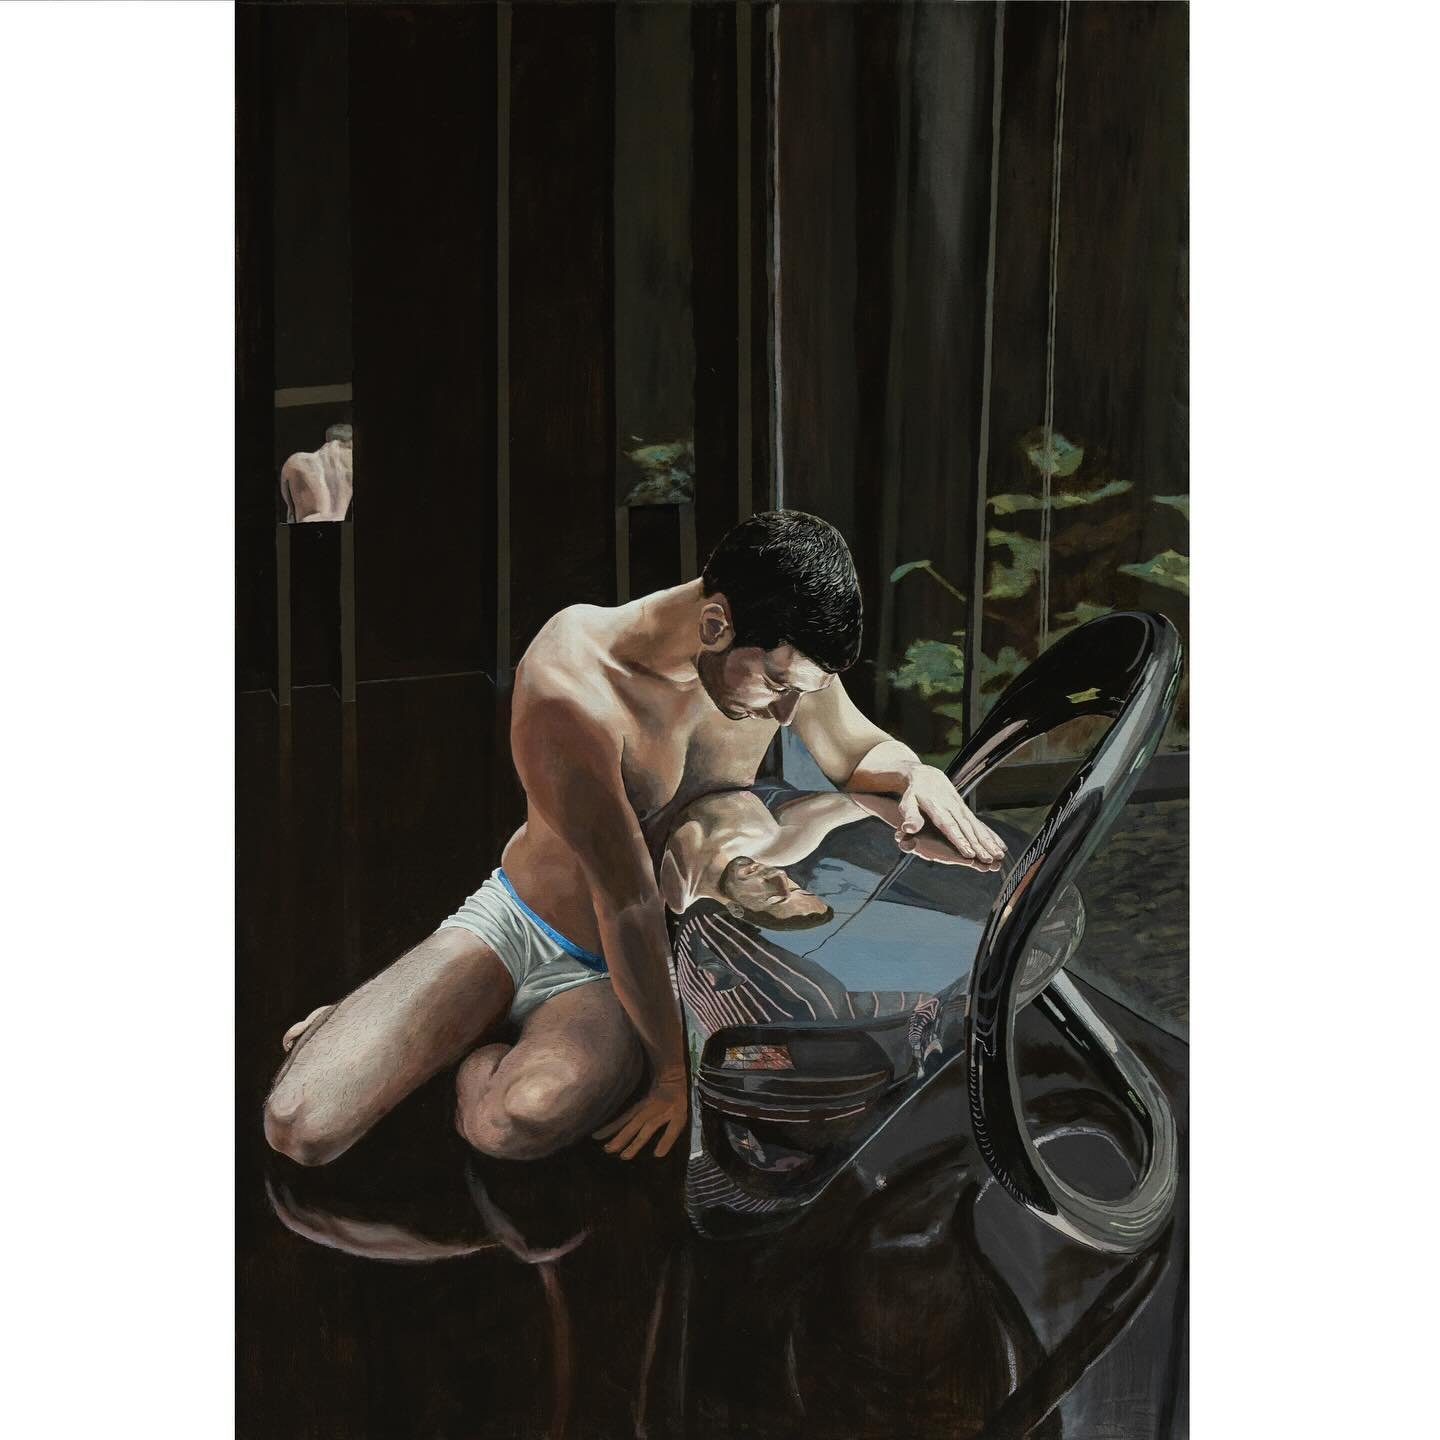 &ldquo;Narcissus @ the Nexus of Love&rdquo;. Oil on canvas 80x120cm. Narcissus was a figure from Greek mythology of unparalleled beauty. Their allure transcends gender, capturing the hearts of all who gaze upon them. In a sad twist of fate, Narcissus